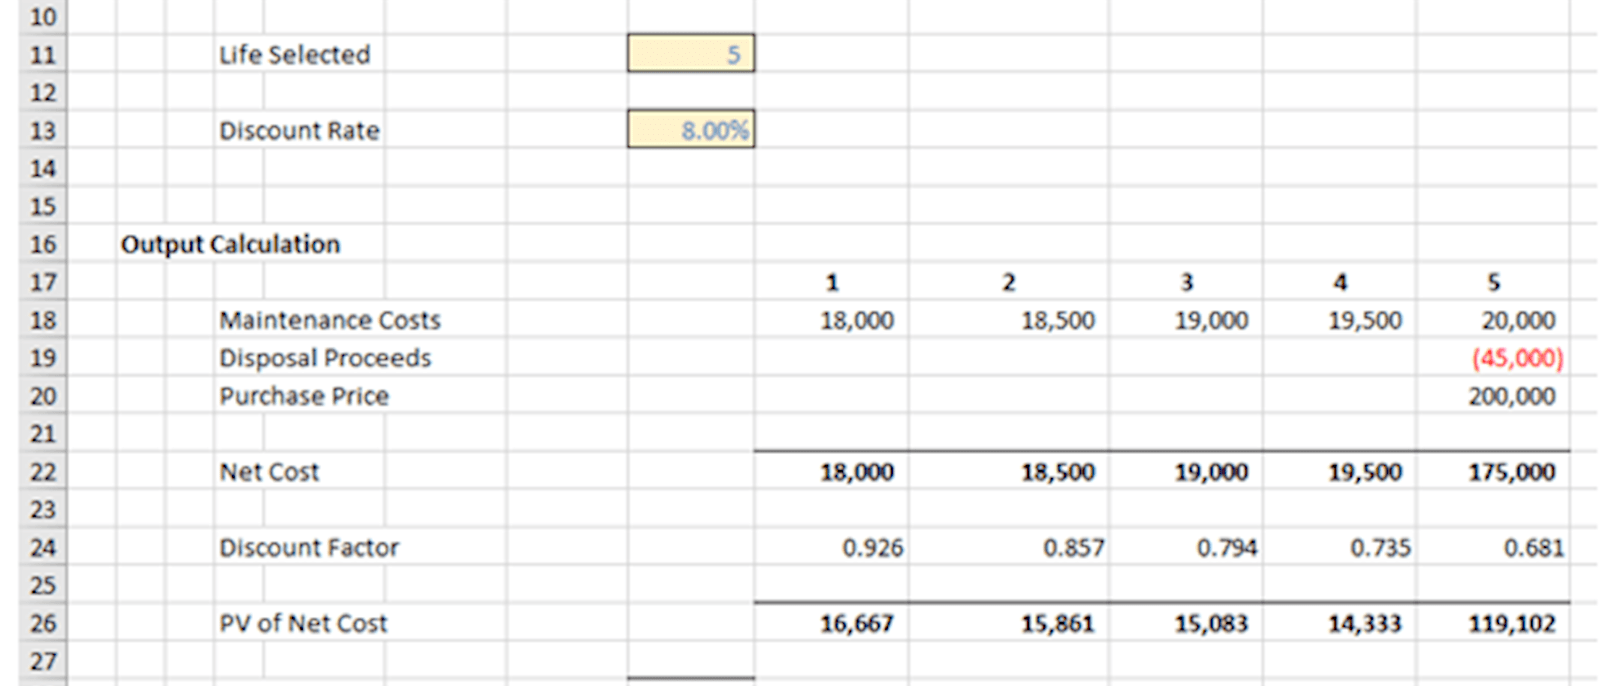 image of 5 years calculation of net present value